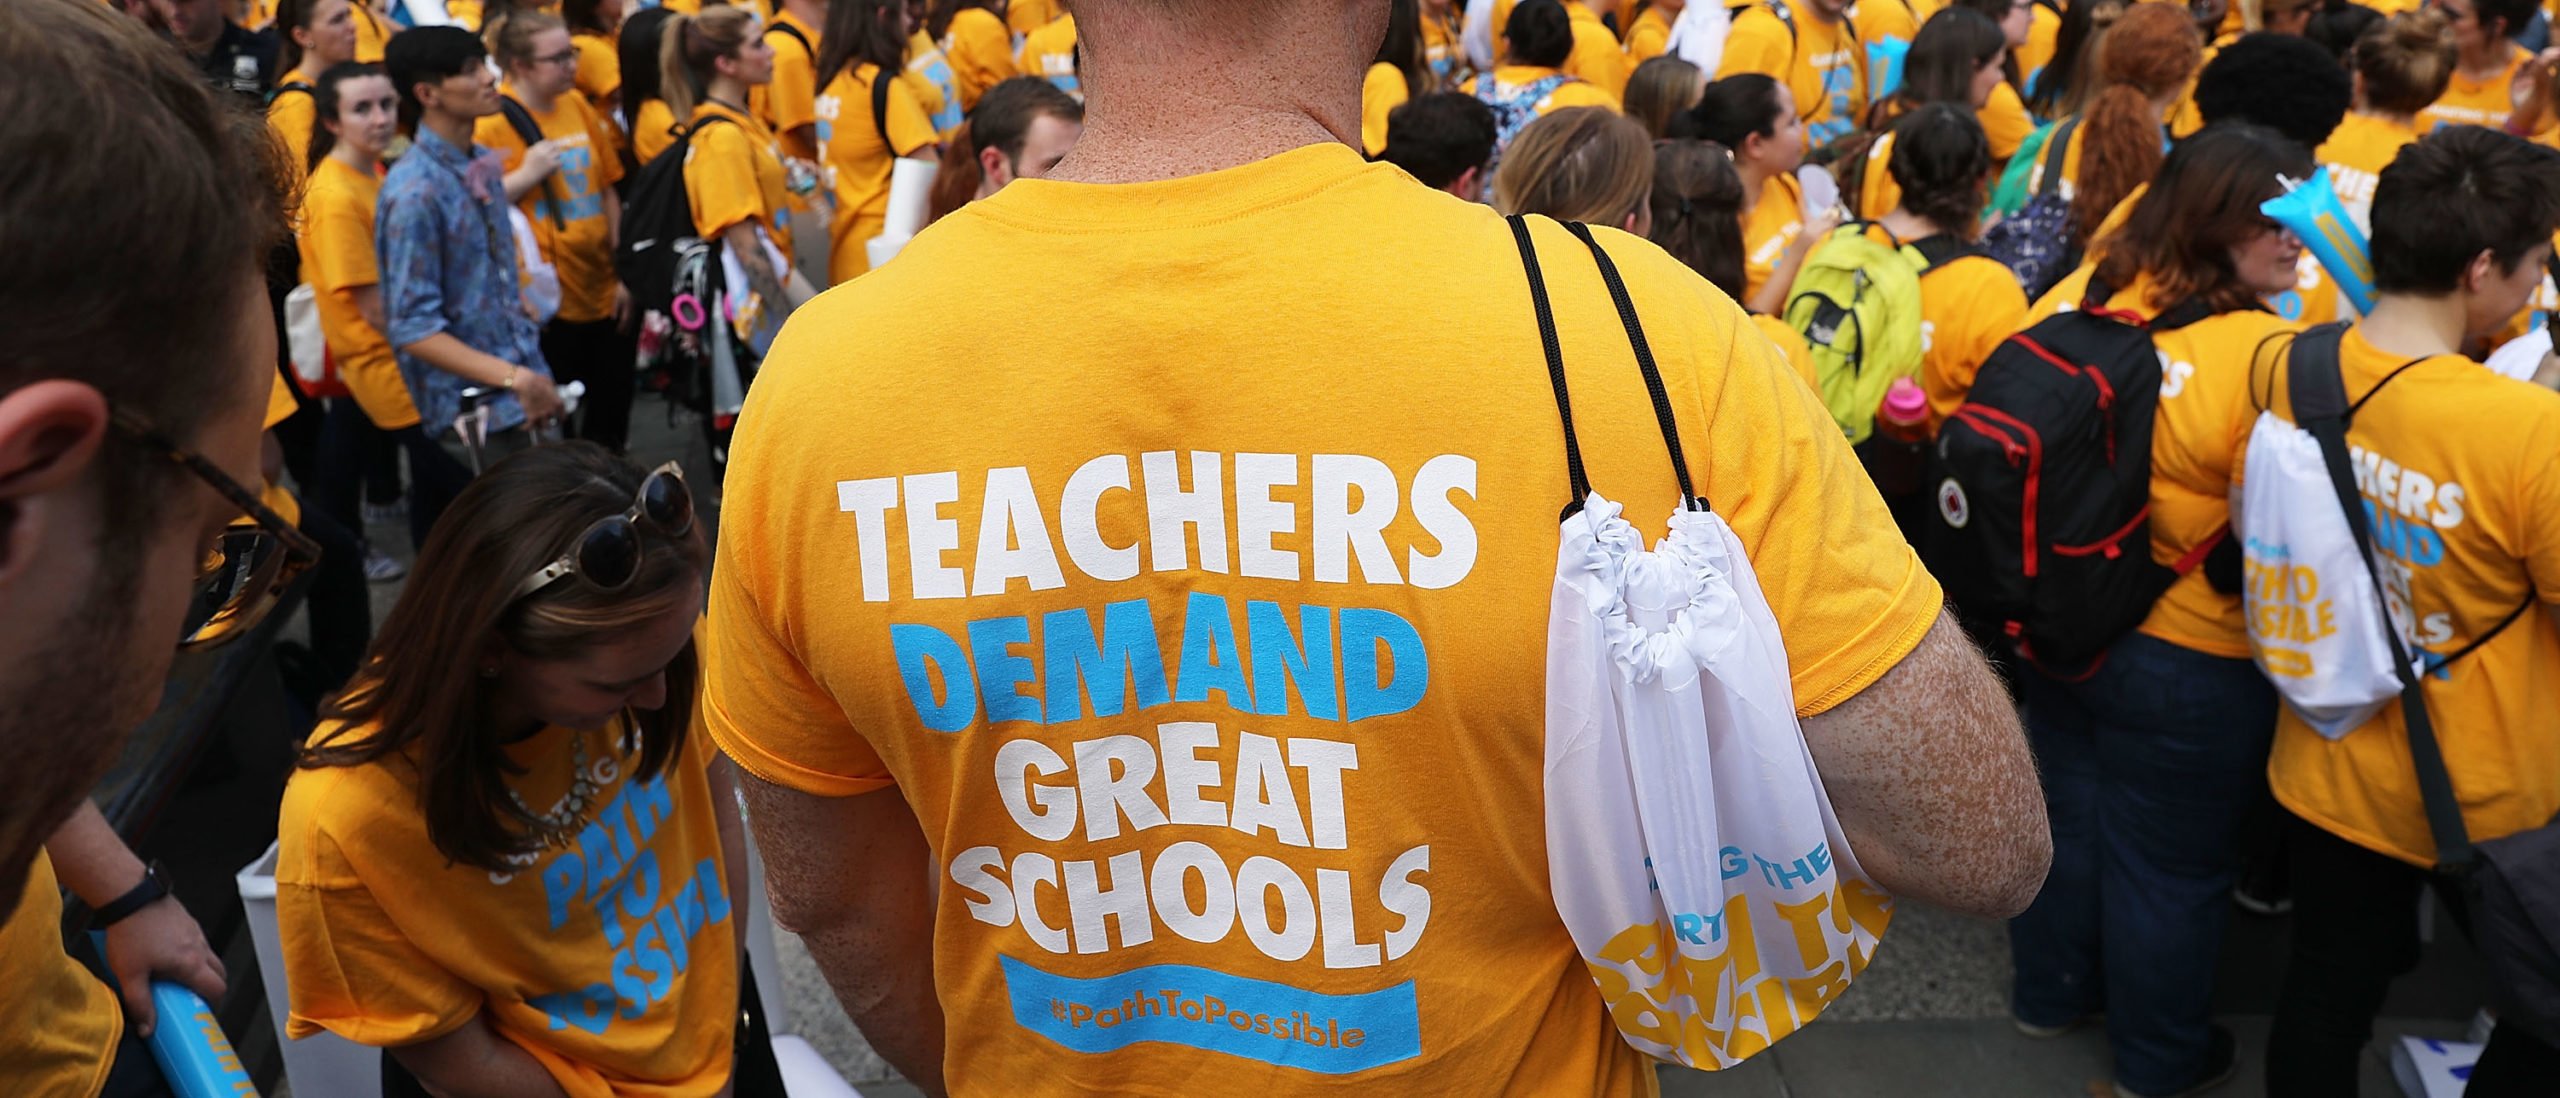 Thousands of city teachers rally in Foley Square on Wednesday afternoon to demand that New York City Mayor Bill de Blasio take action on charter school growth on October 19, 2016 in New York City. The teachers want the mayor to approve the opening of new charter schools, which members of the teacher's union are against. The protesters want to see the doubling of the number of students served by charters to 200,000, which would be 20 percent of the city's public school enrollment. (Photo by Spencer Platt/Getty Images)